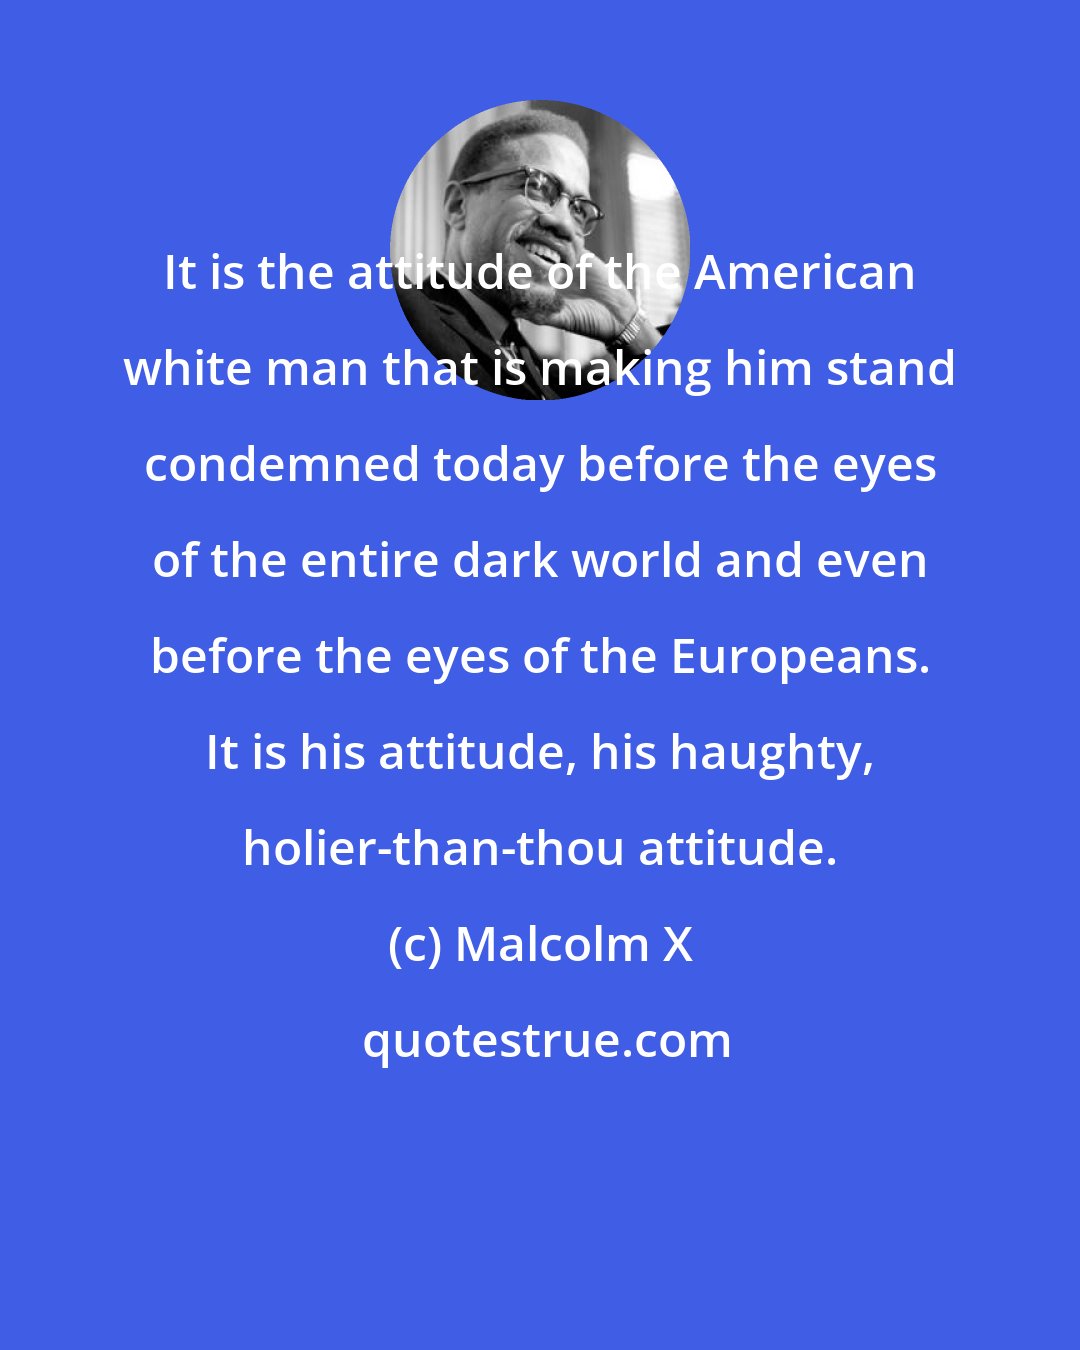 Malcolm X: It is the attitude of the American white man that is making him stand condemned today before the eyes of the entire dark world and even before the eyes of the Europeans. It is his attitude, his haughty, holier-than-thou attitude.